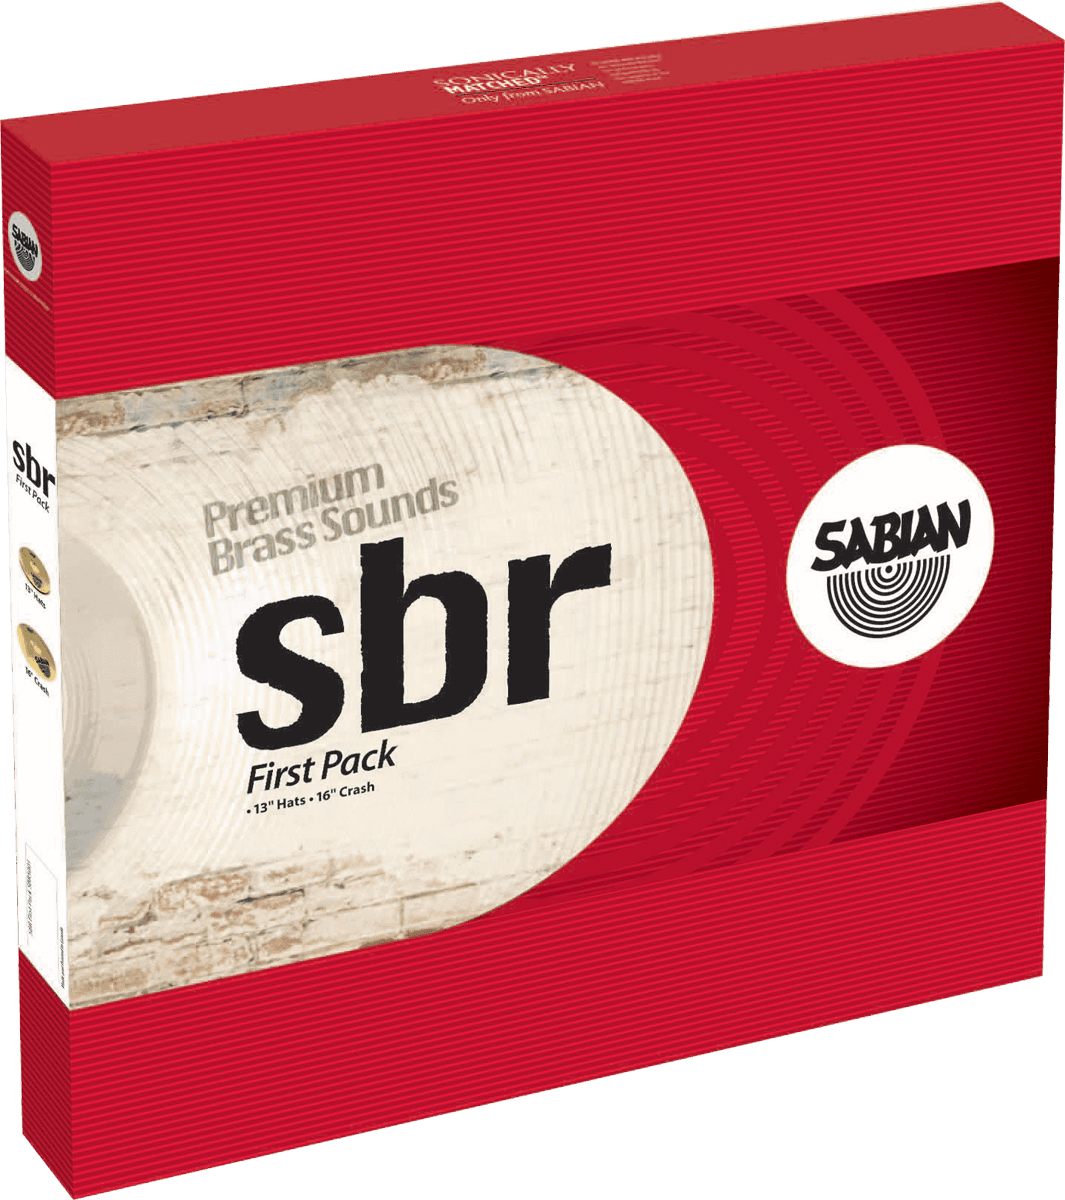 Sabian Sbr First Pack - Cymbals set - Main picture